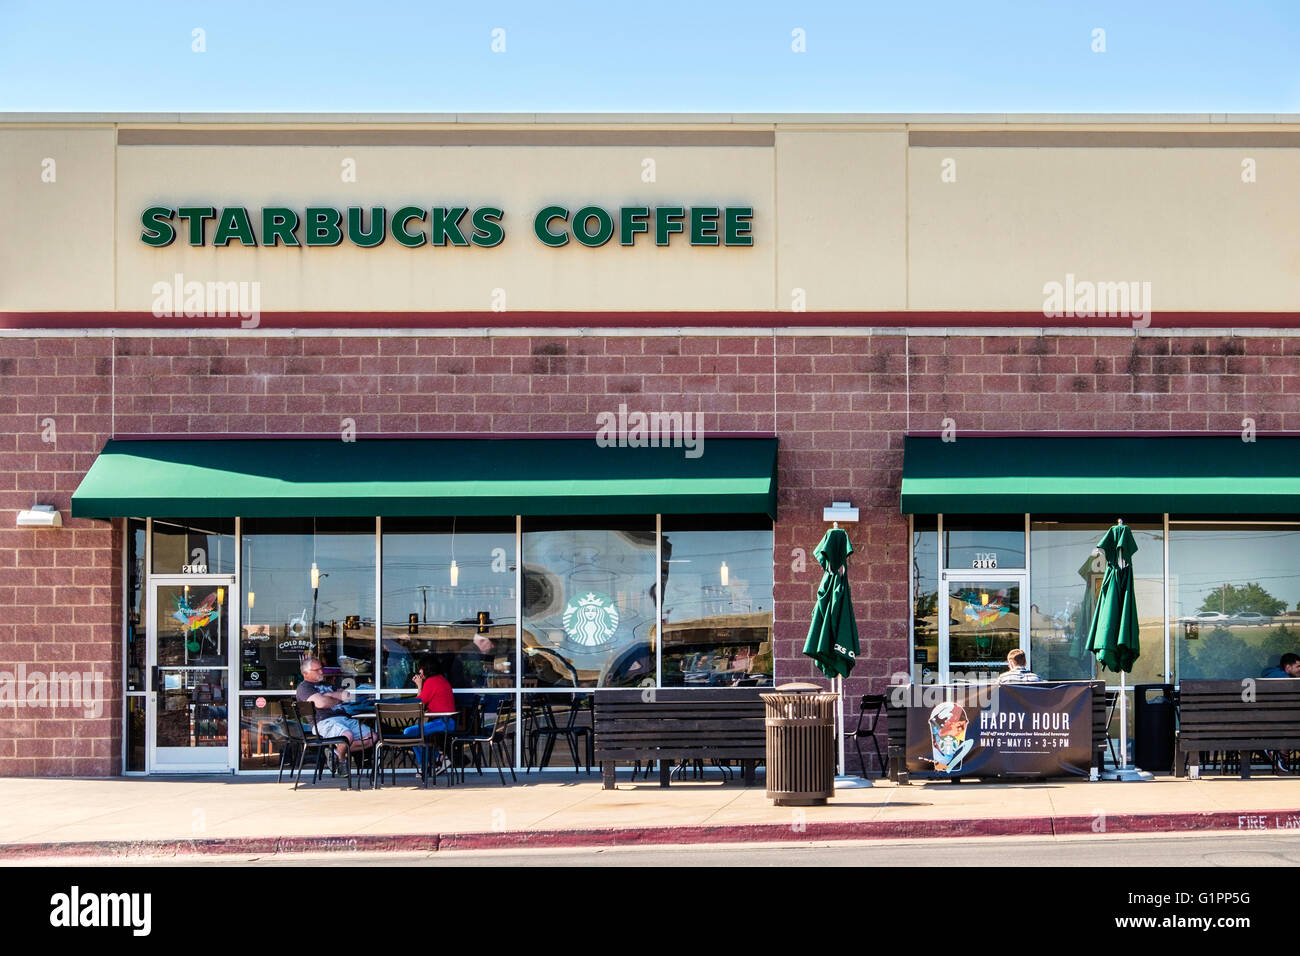 The exterior of a Starbucks coffee house showing customers on an outdoor patio. Memorial road, Oklahoma City, Oklahoma, USA. Stock Photo